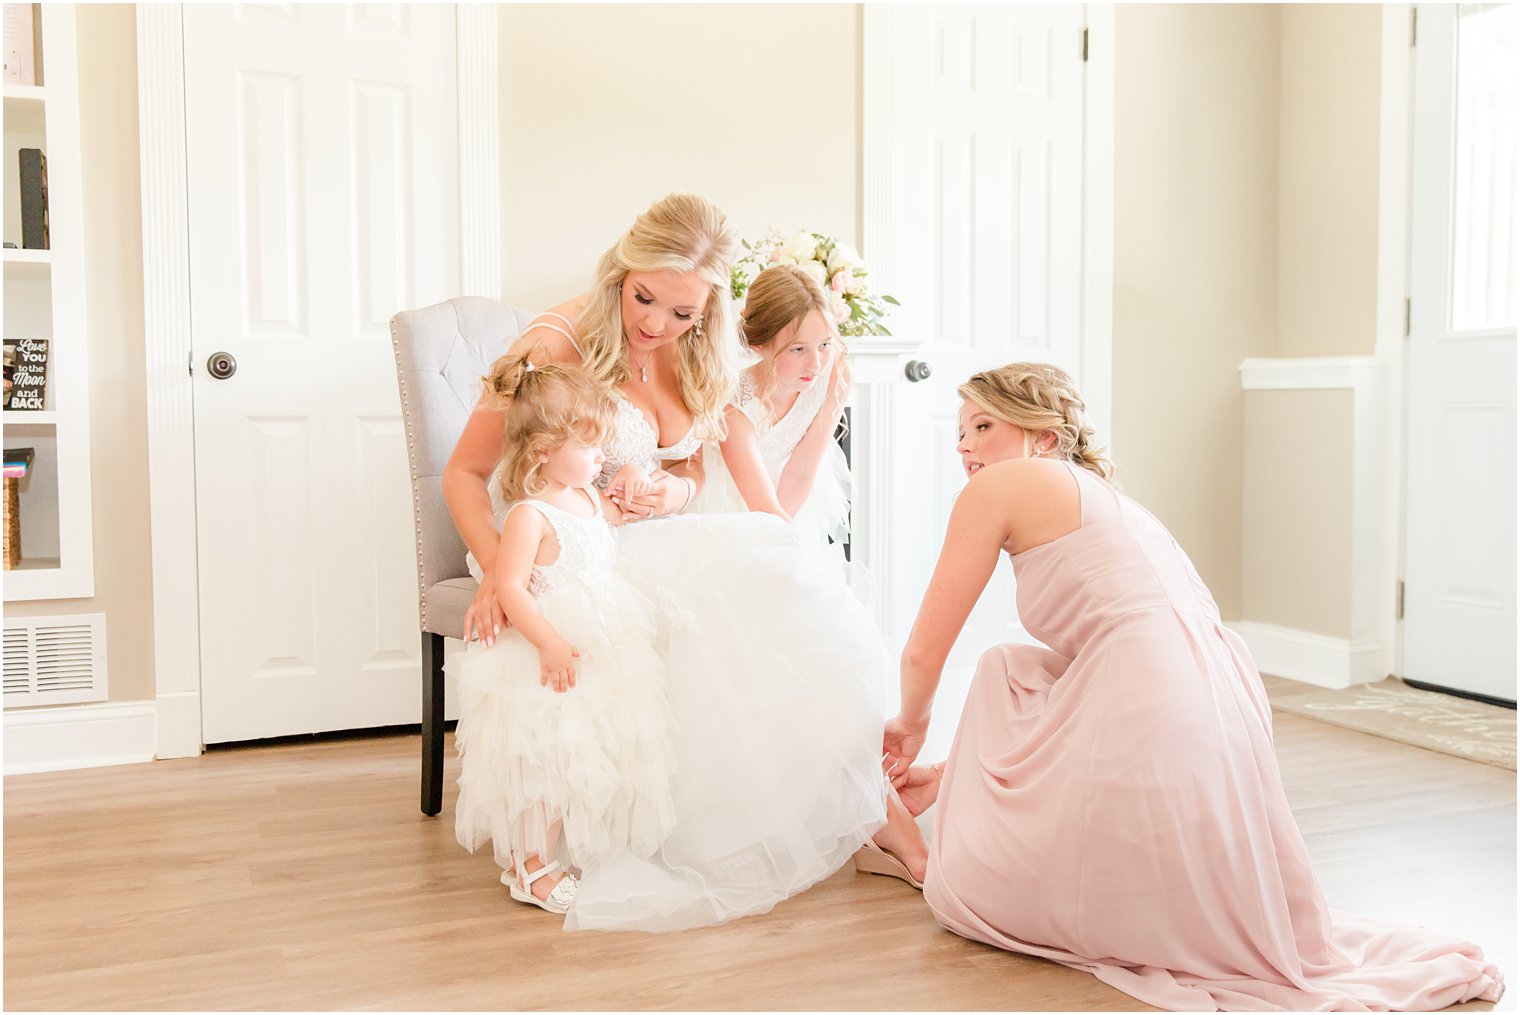 bride talks to flower girls while bridesmaid helps with shoes during wedding prep 